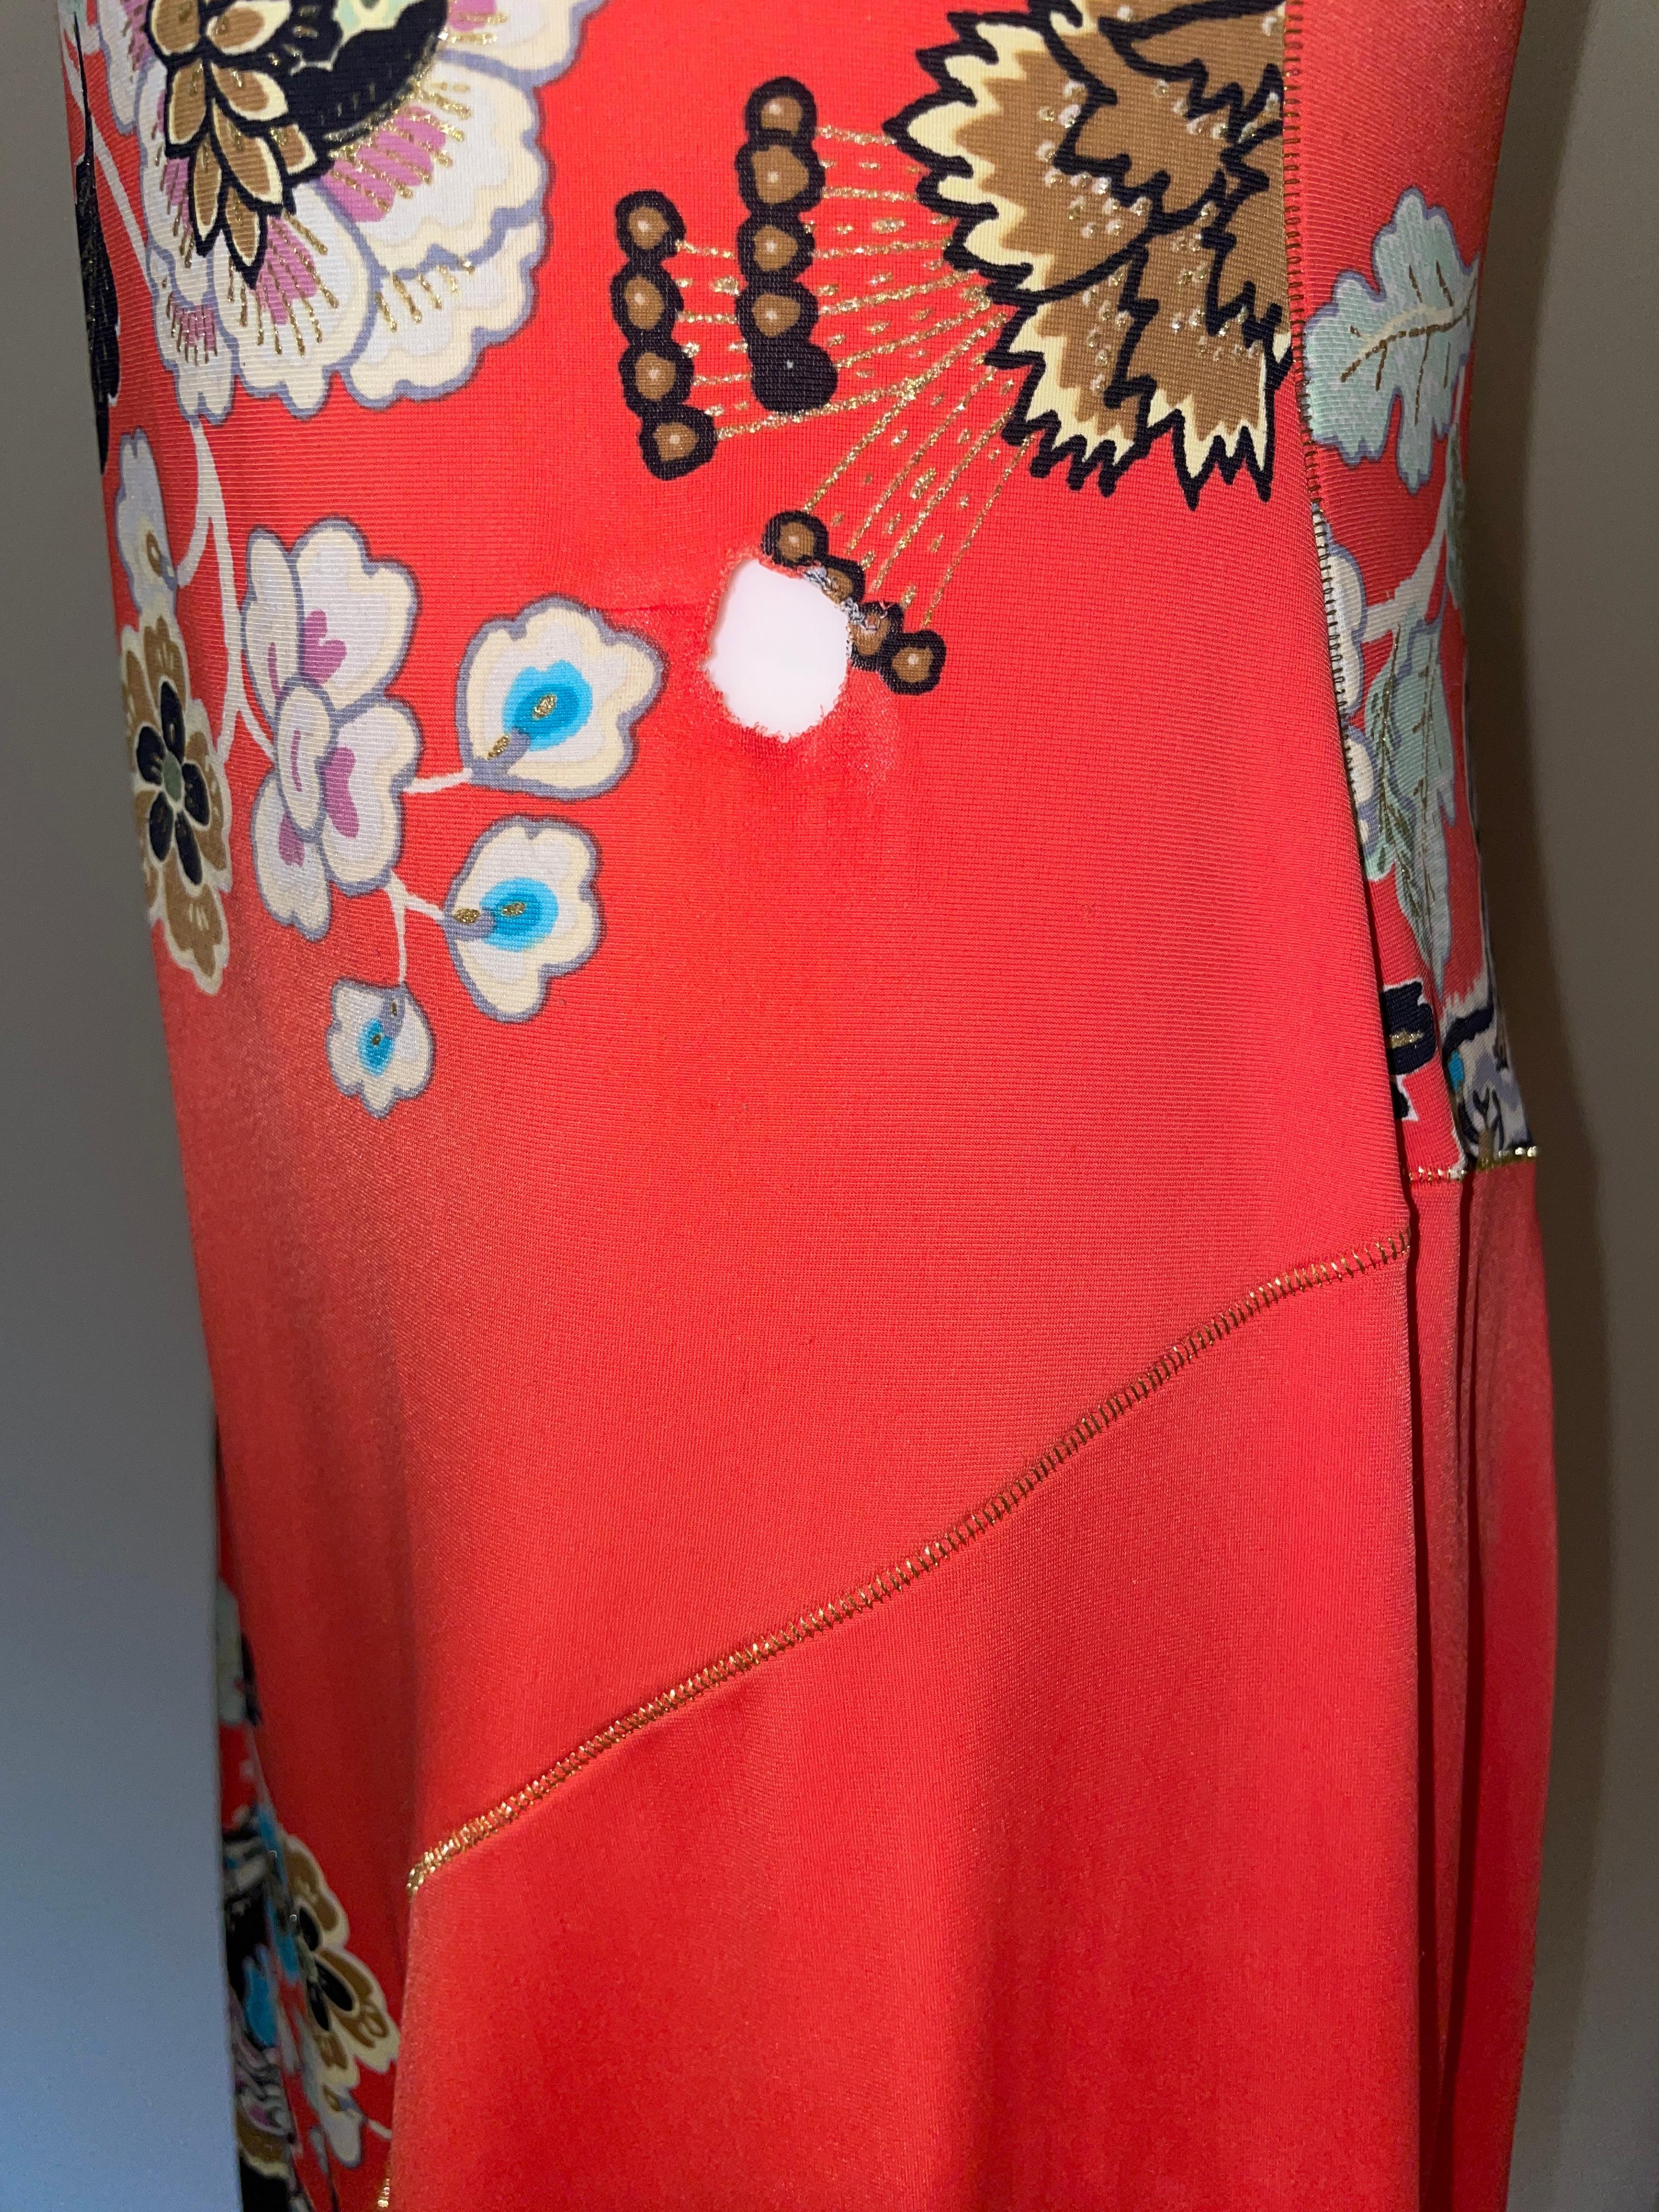 Vintage Roberto Cavalli 2003 runway print vibrant colored dress! There is a HOLE in this dress. Priced accordingly. I would personally HEM this dress and use the extra fabric to repair the hole from the inside. Otherwise, no issues. Size Medium,